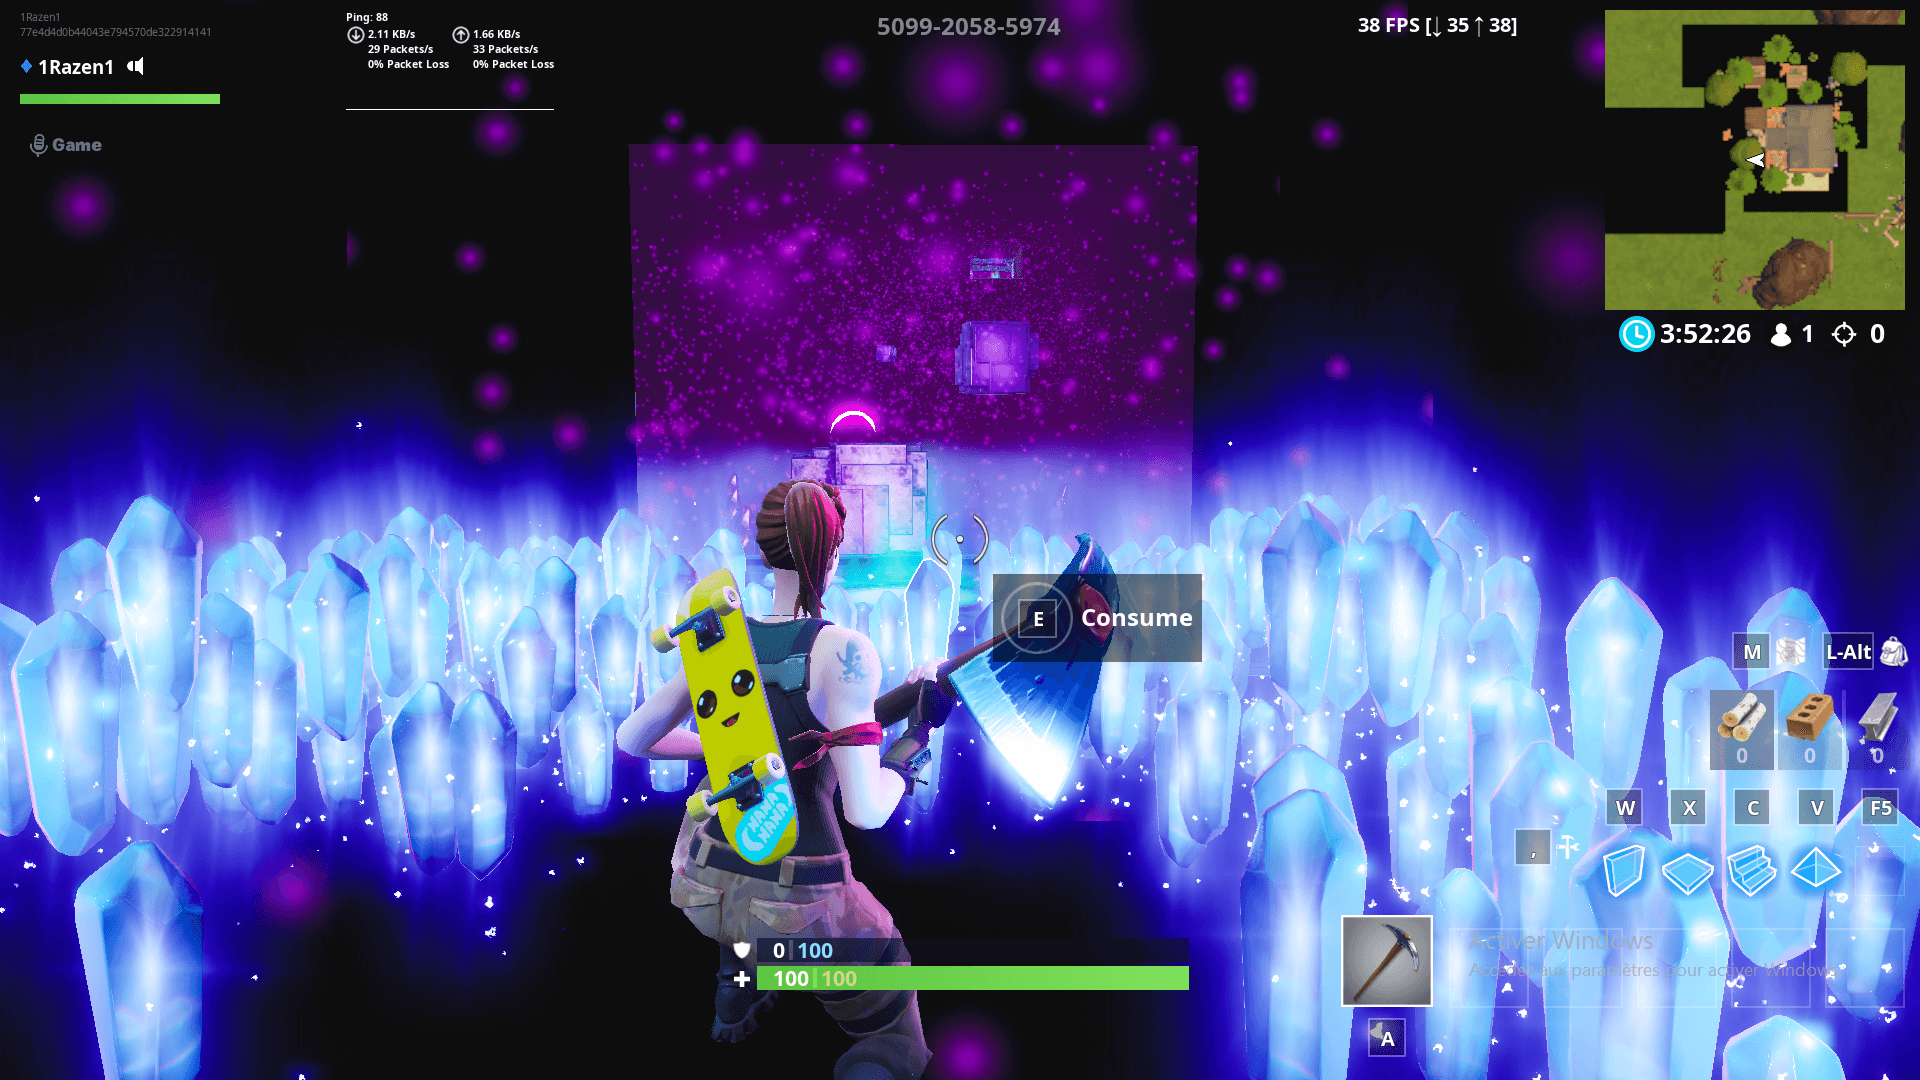 KEVIN THE CUBE OFFICIAL DEATHRUN 2.0 image 2